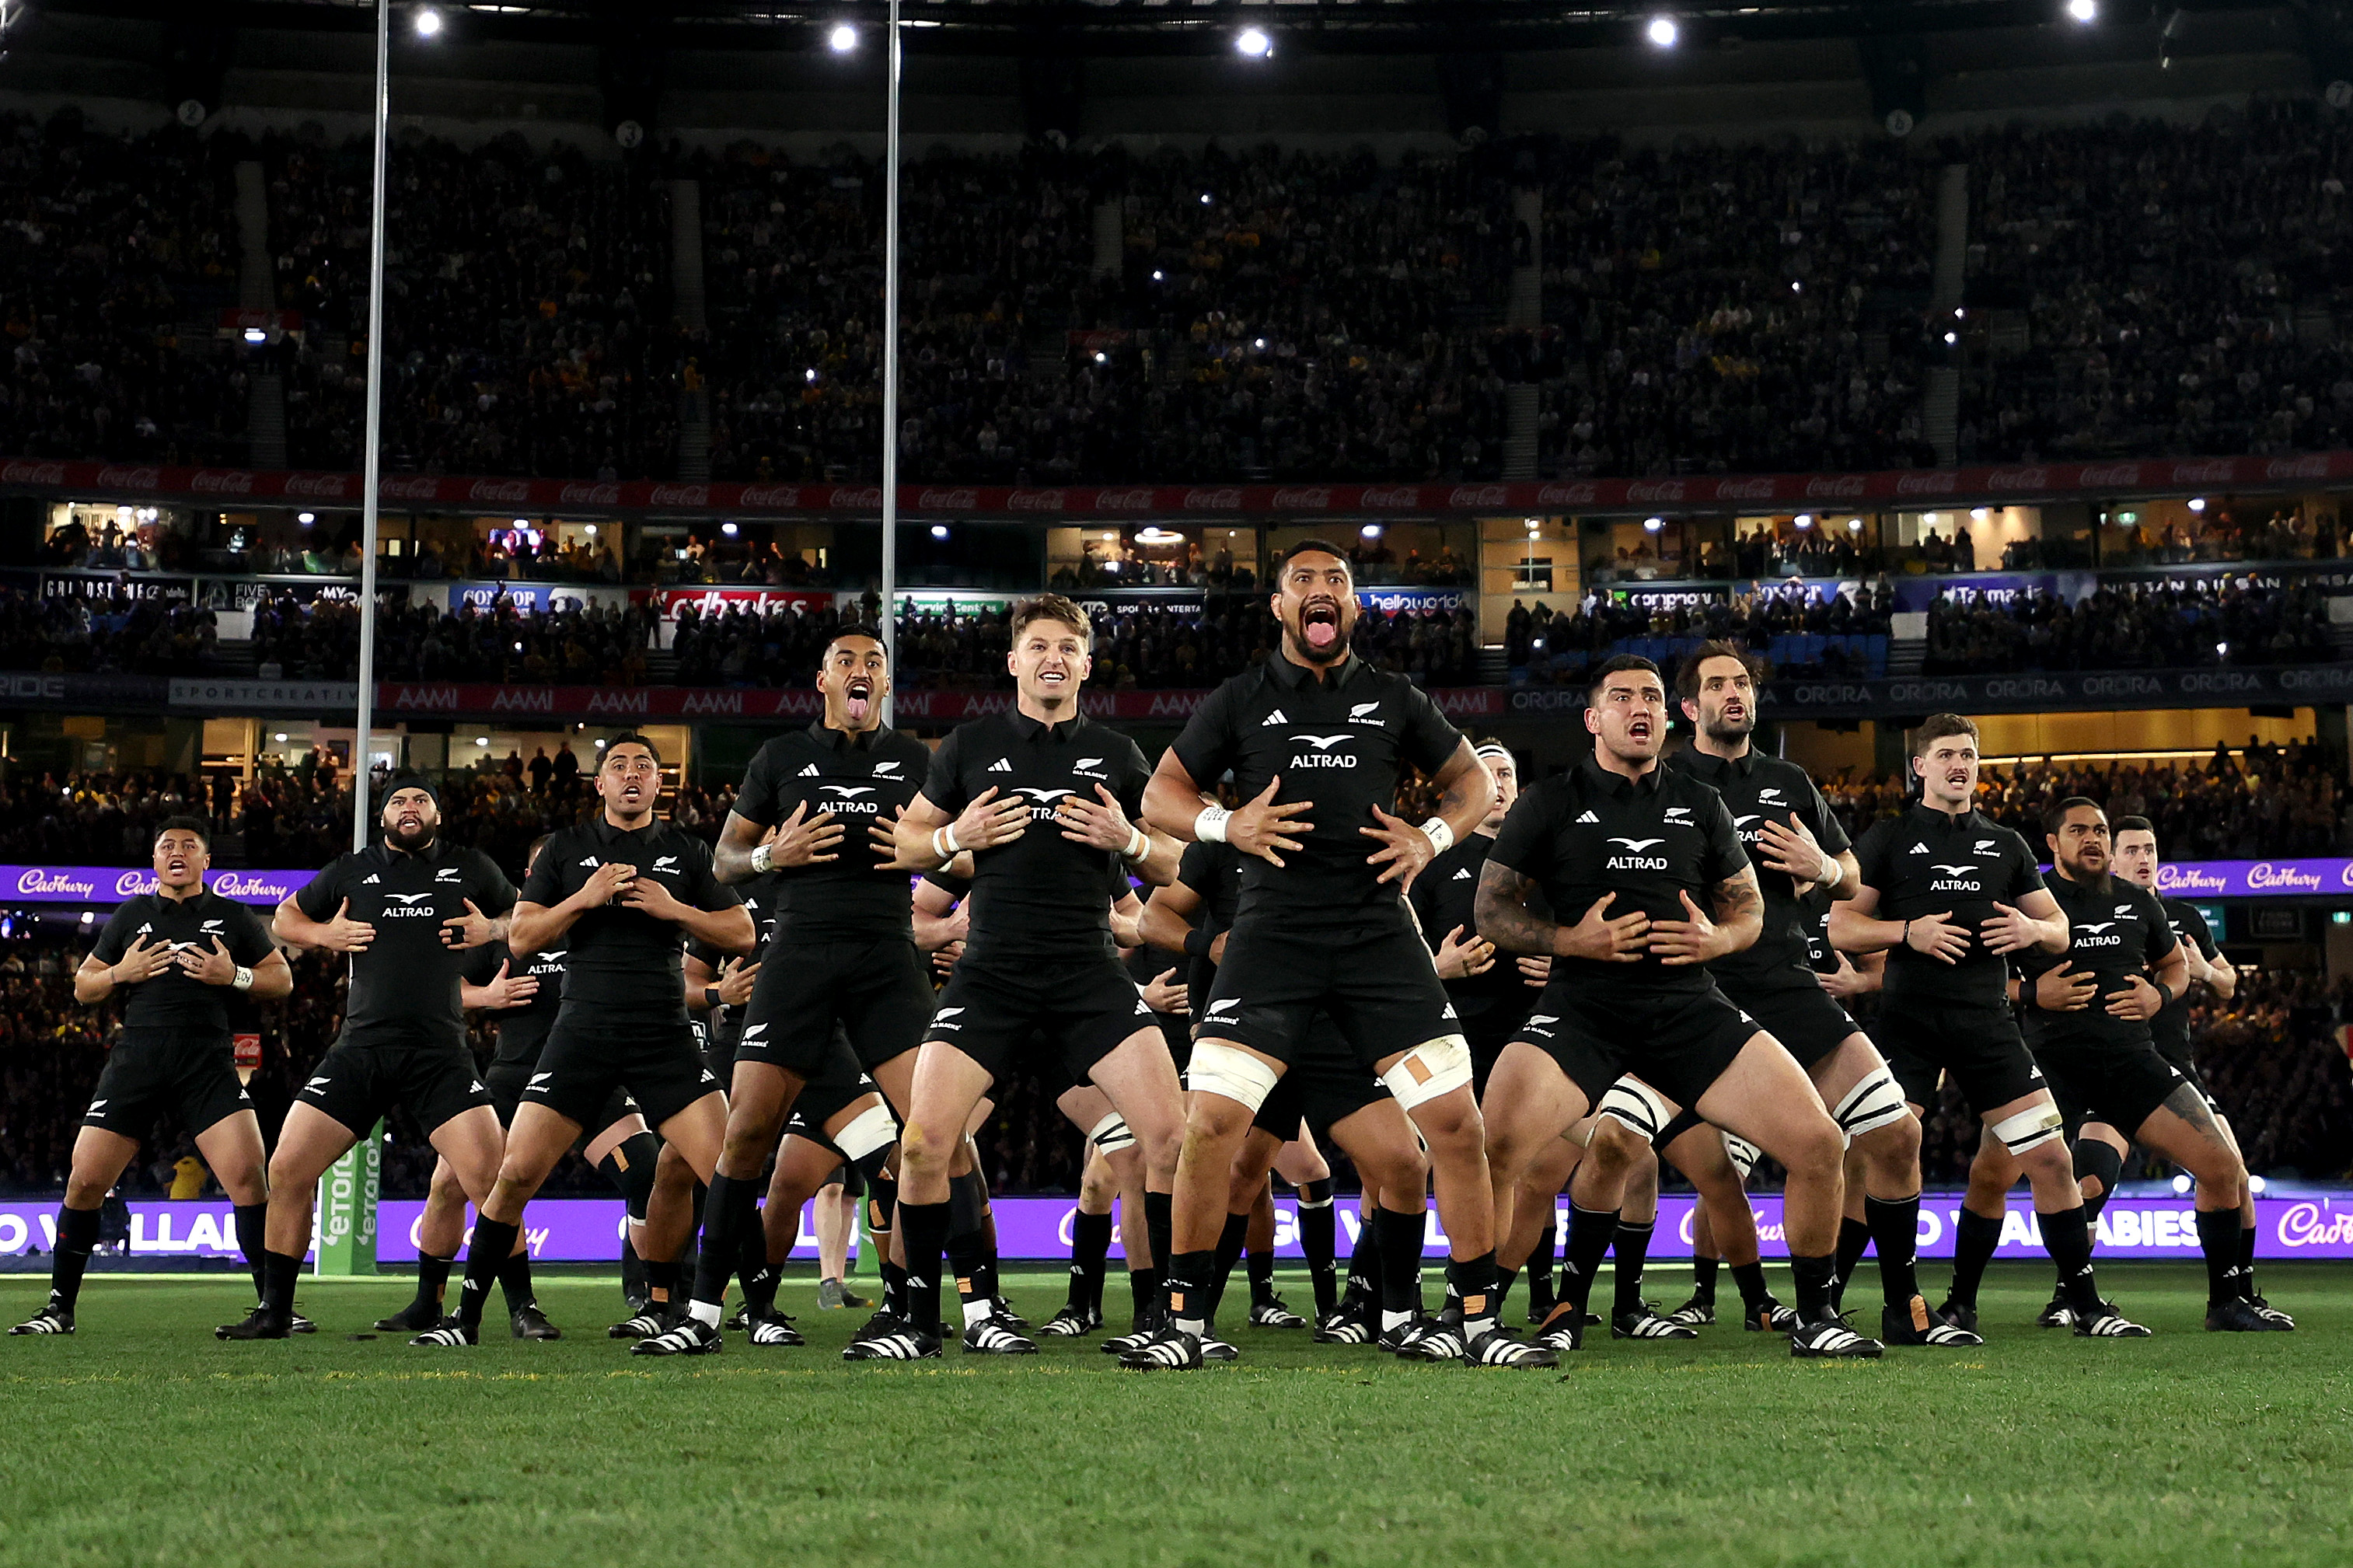 Why the Māori haka is performed before every Womens World Cup match